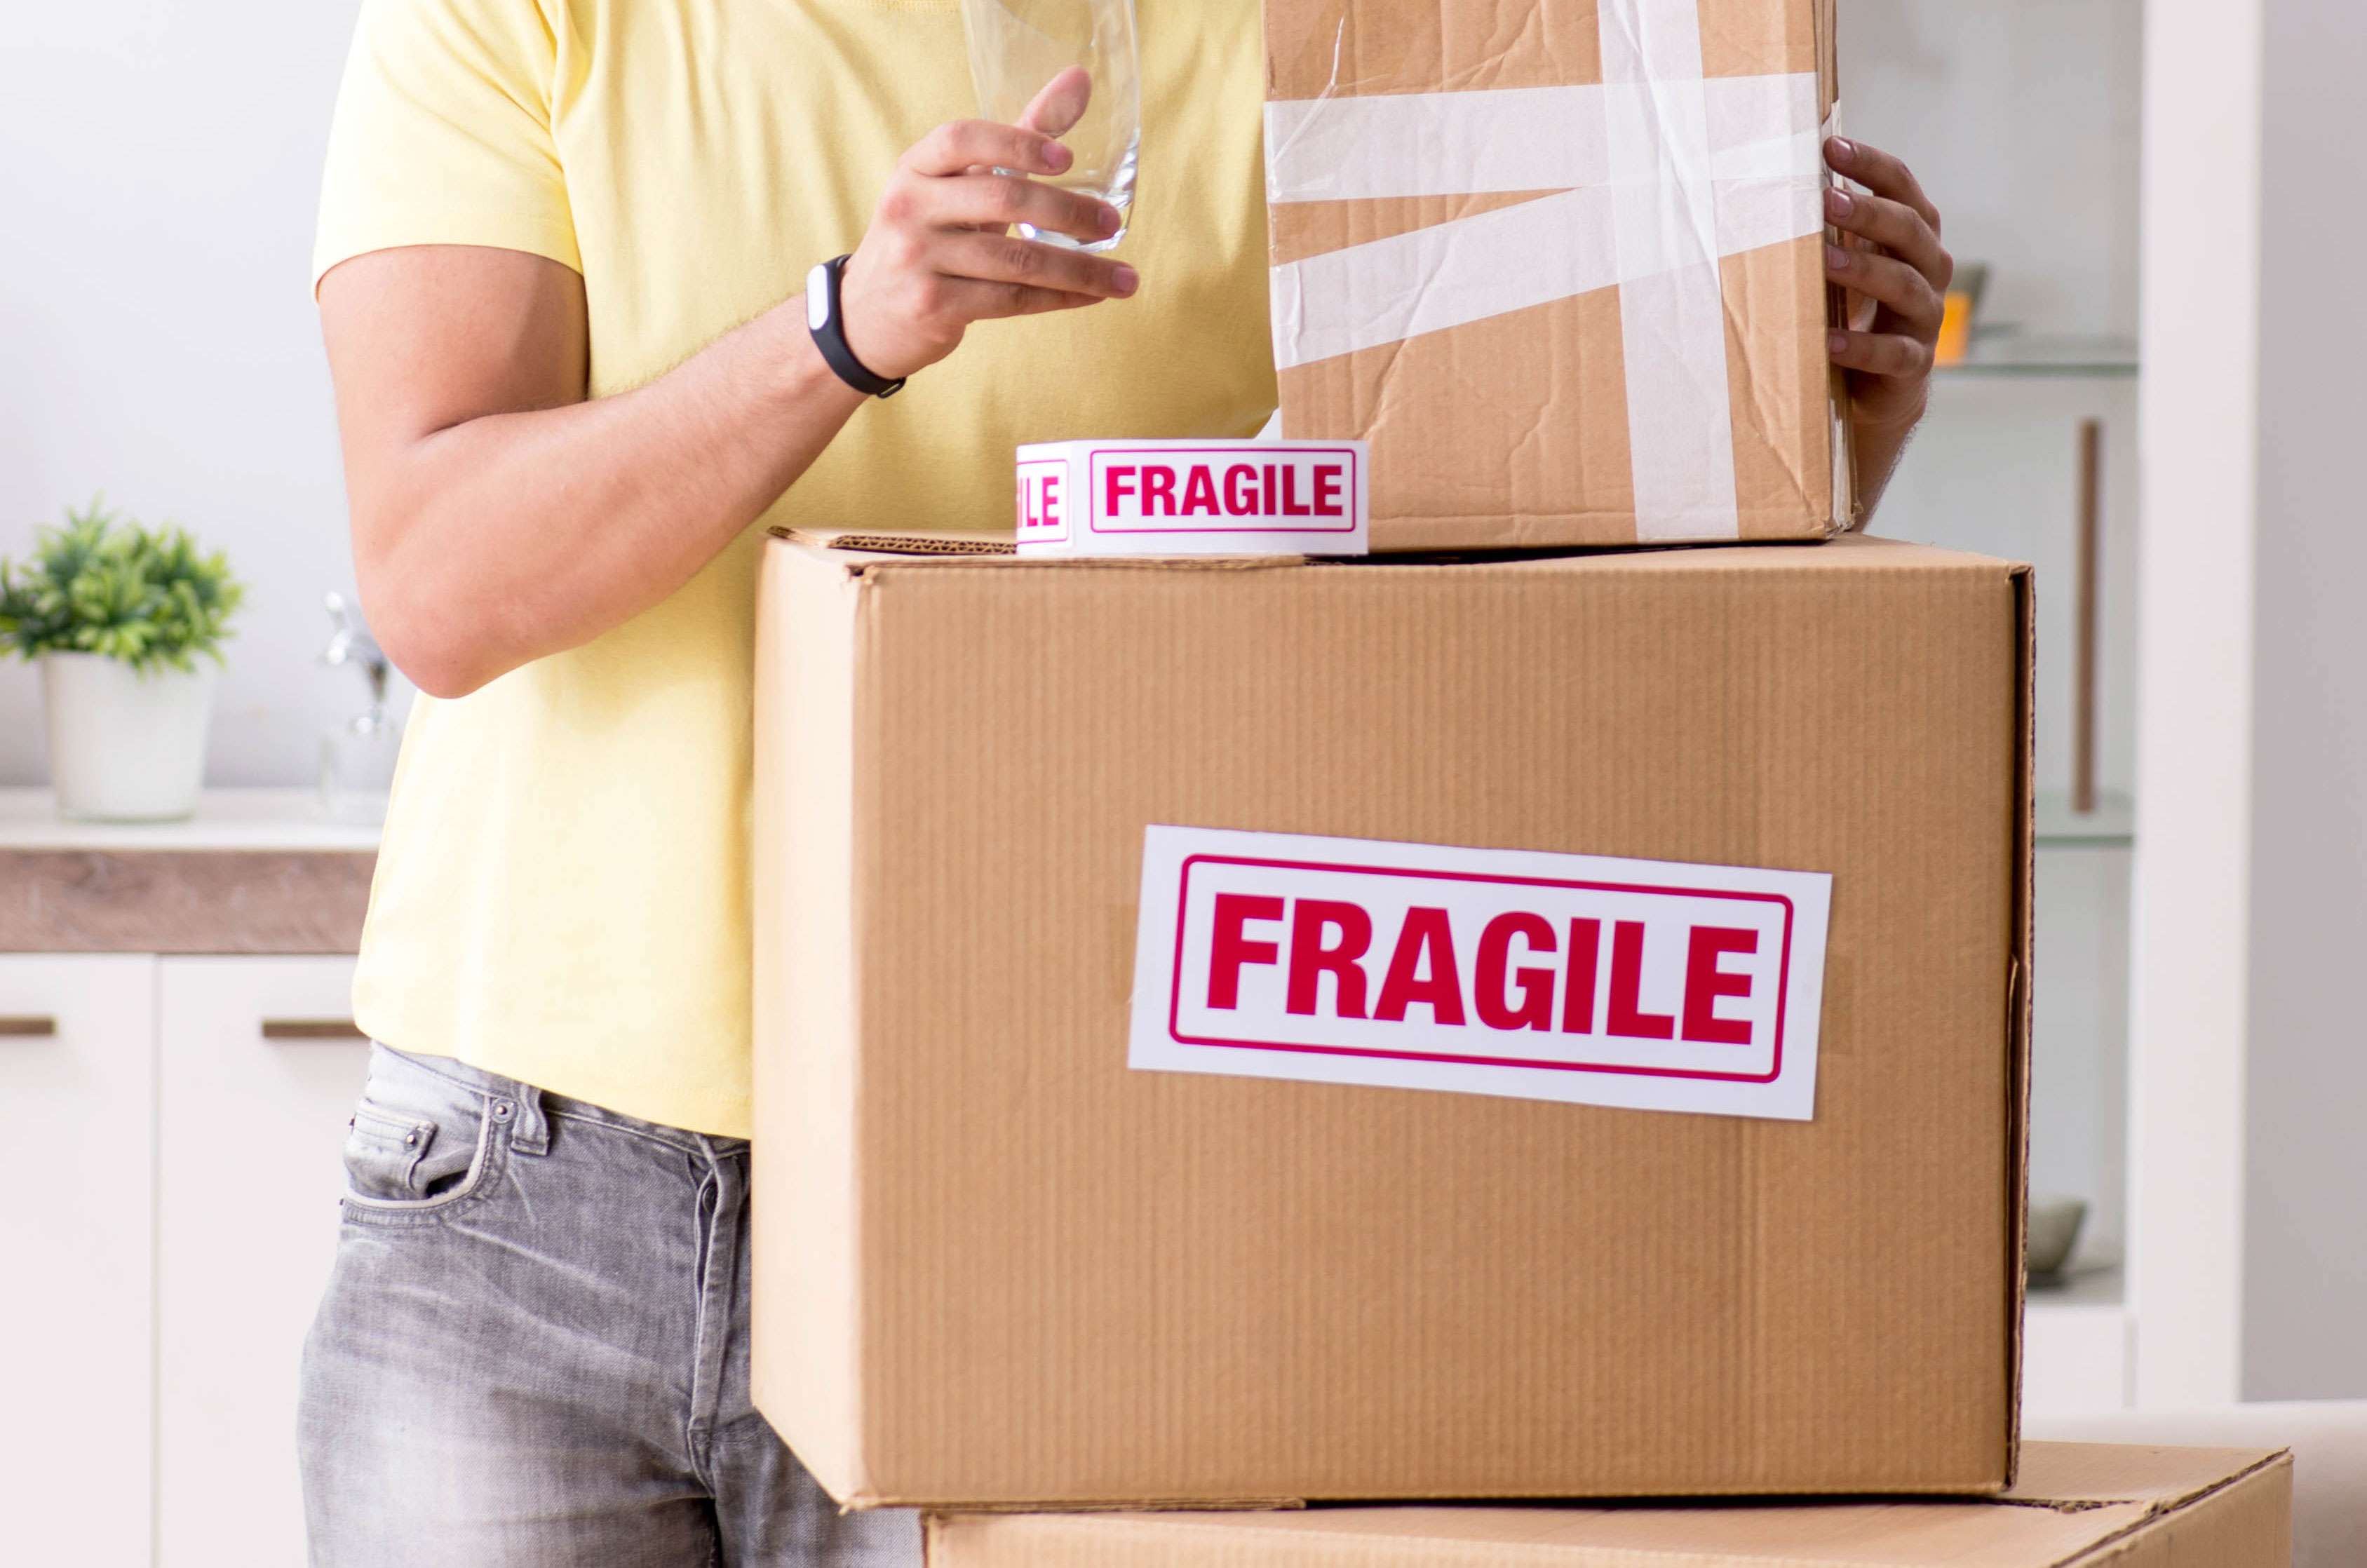 Packaging items. Fragile goods. Fragile Box. Пакинг. Fragile items Packing things.